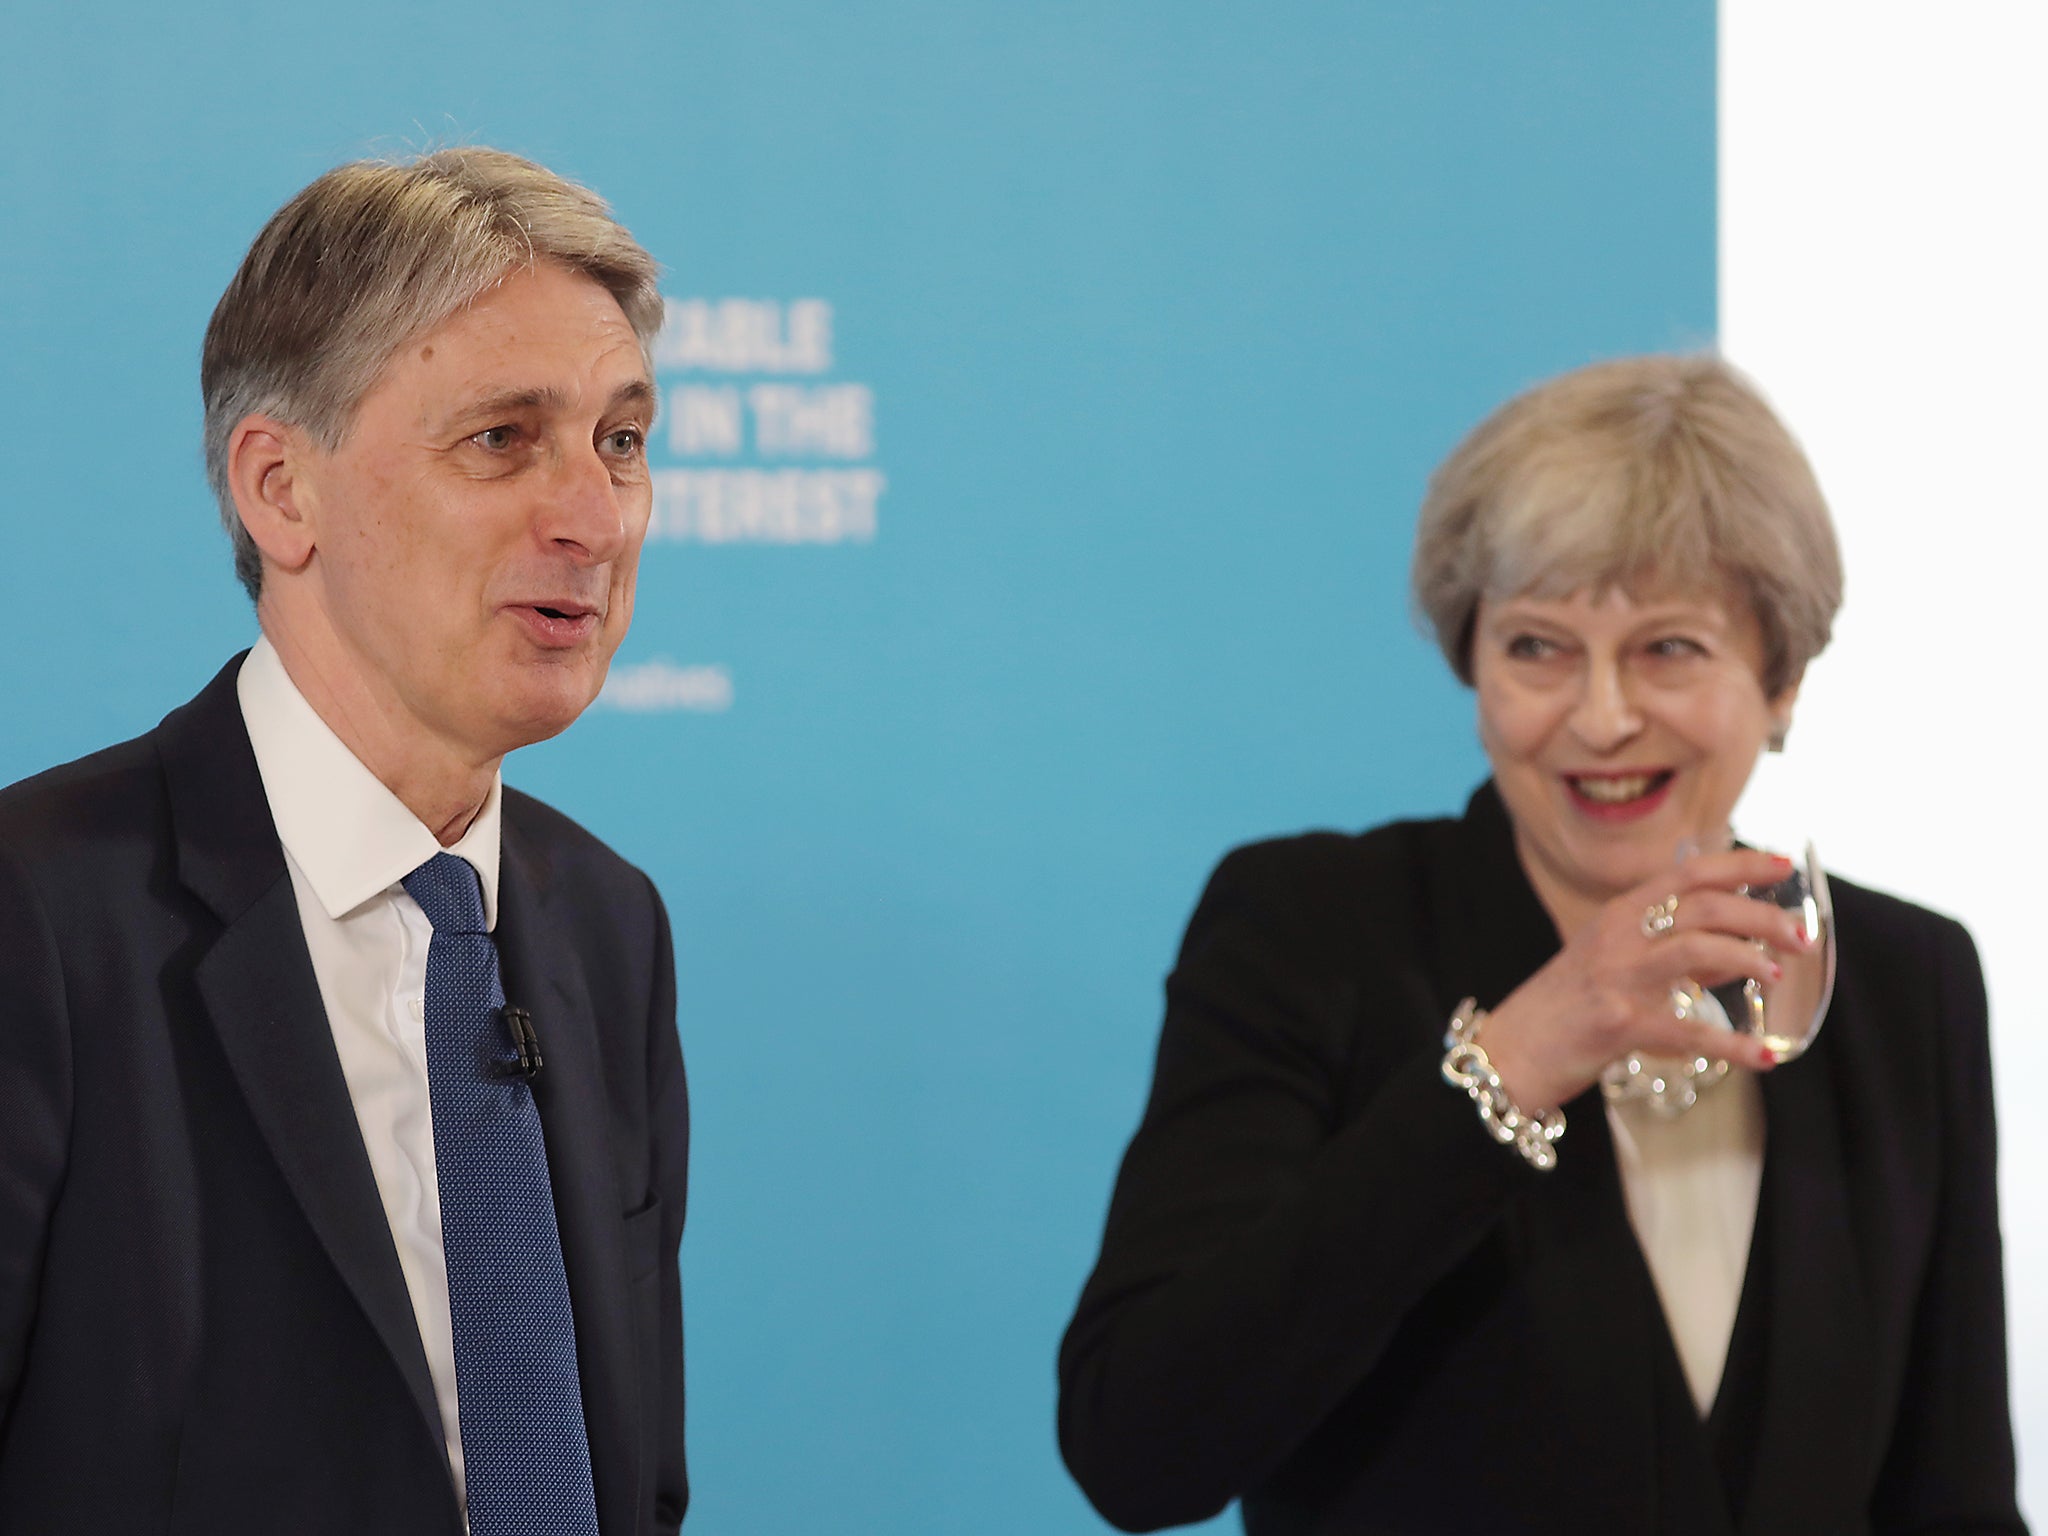 Philip Hammond gets cost of HS2 wrong by £20bn in radio interview